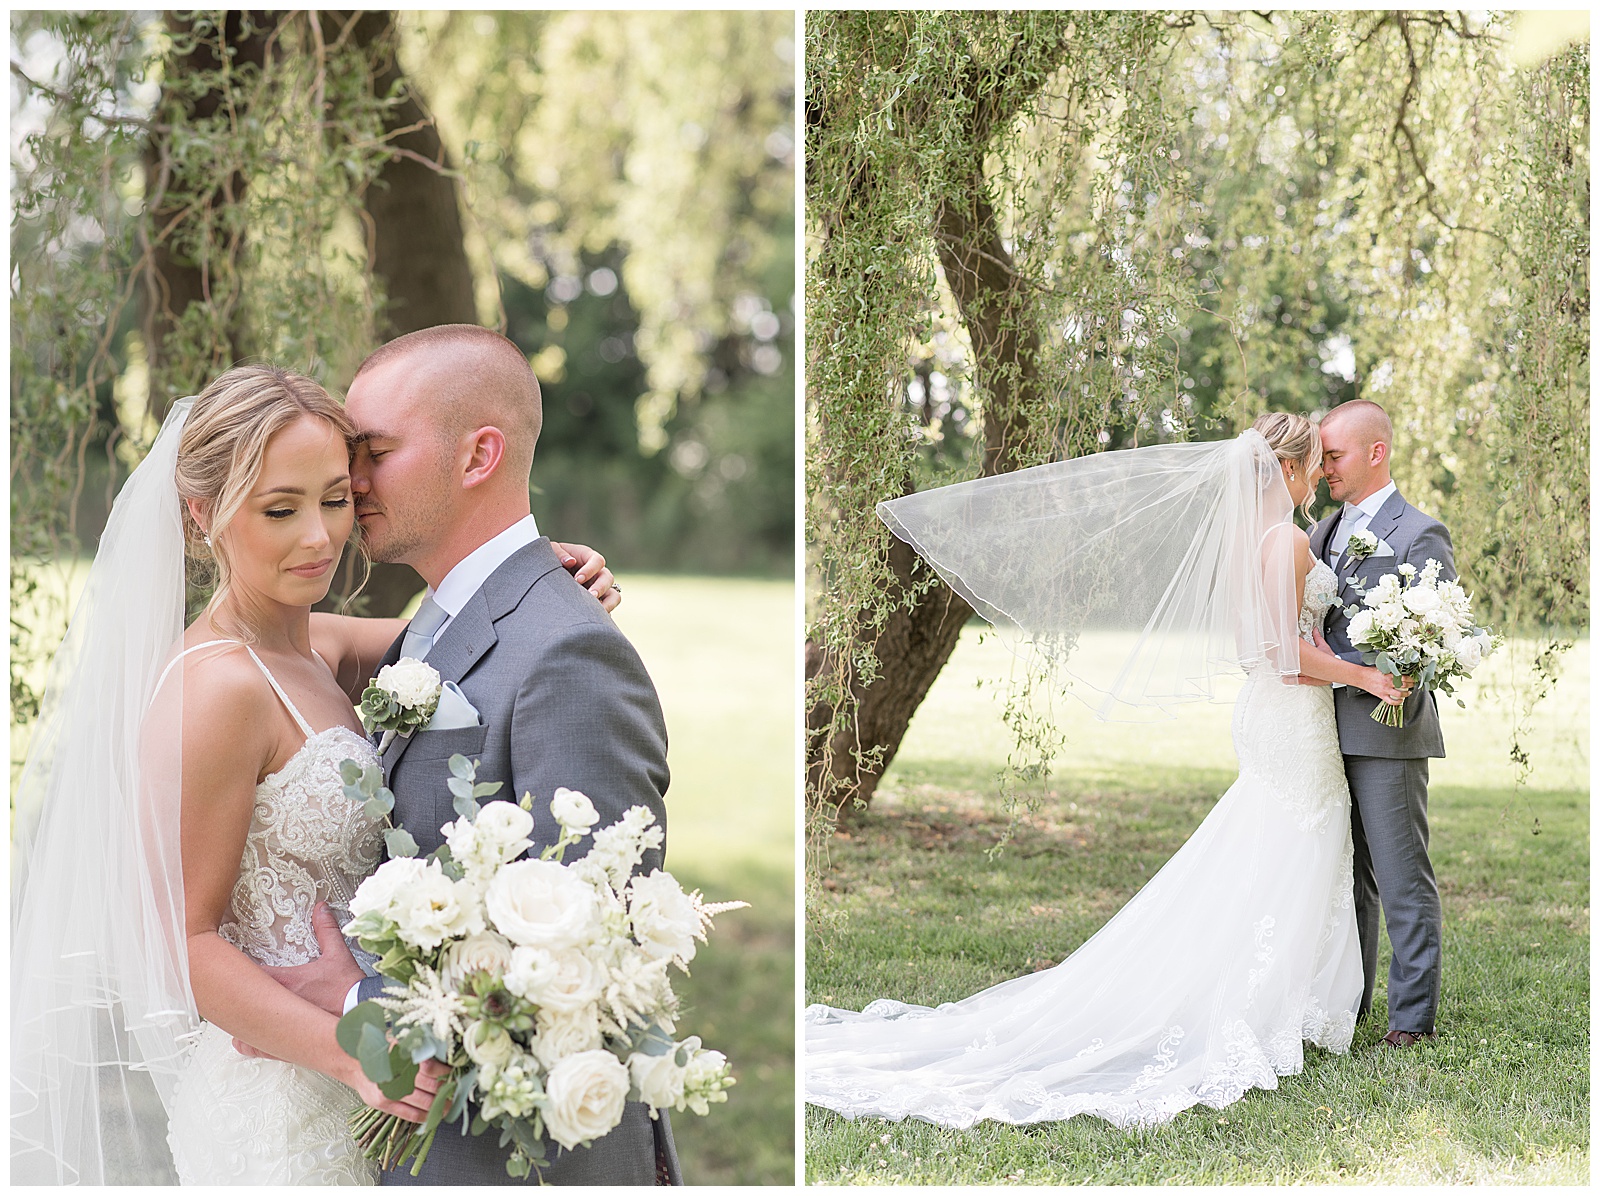 bride and groom hug as bride's veil blows in breeze behind her as they stand under willow tree